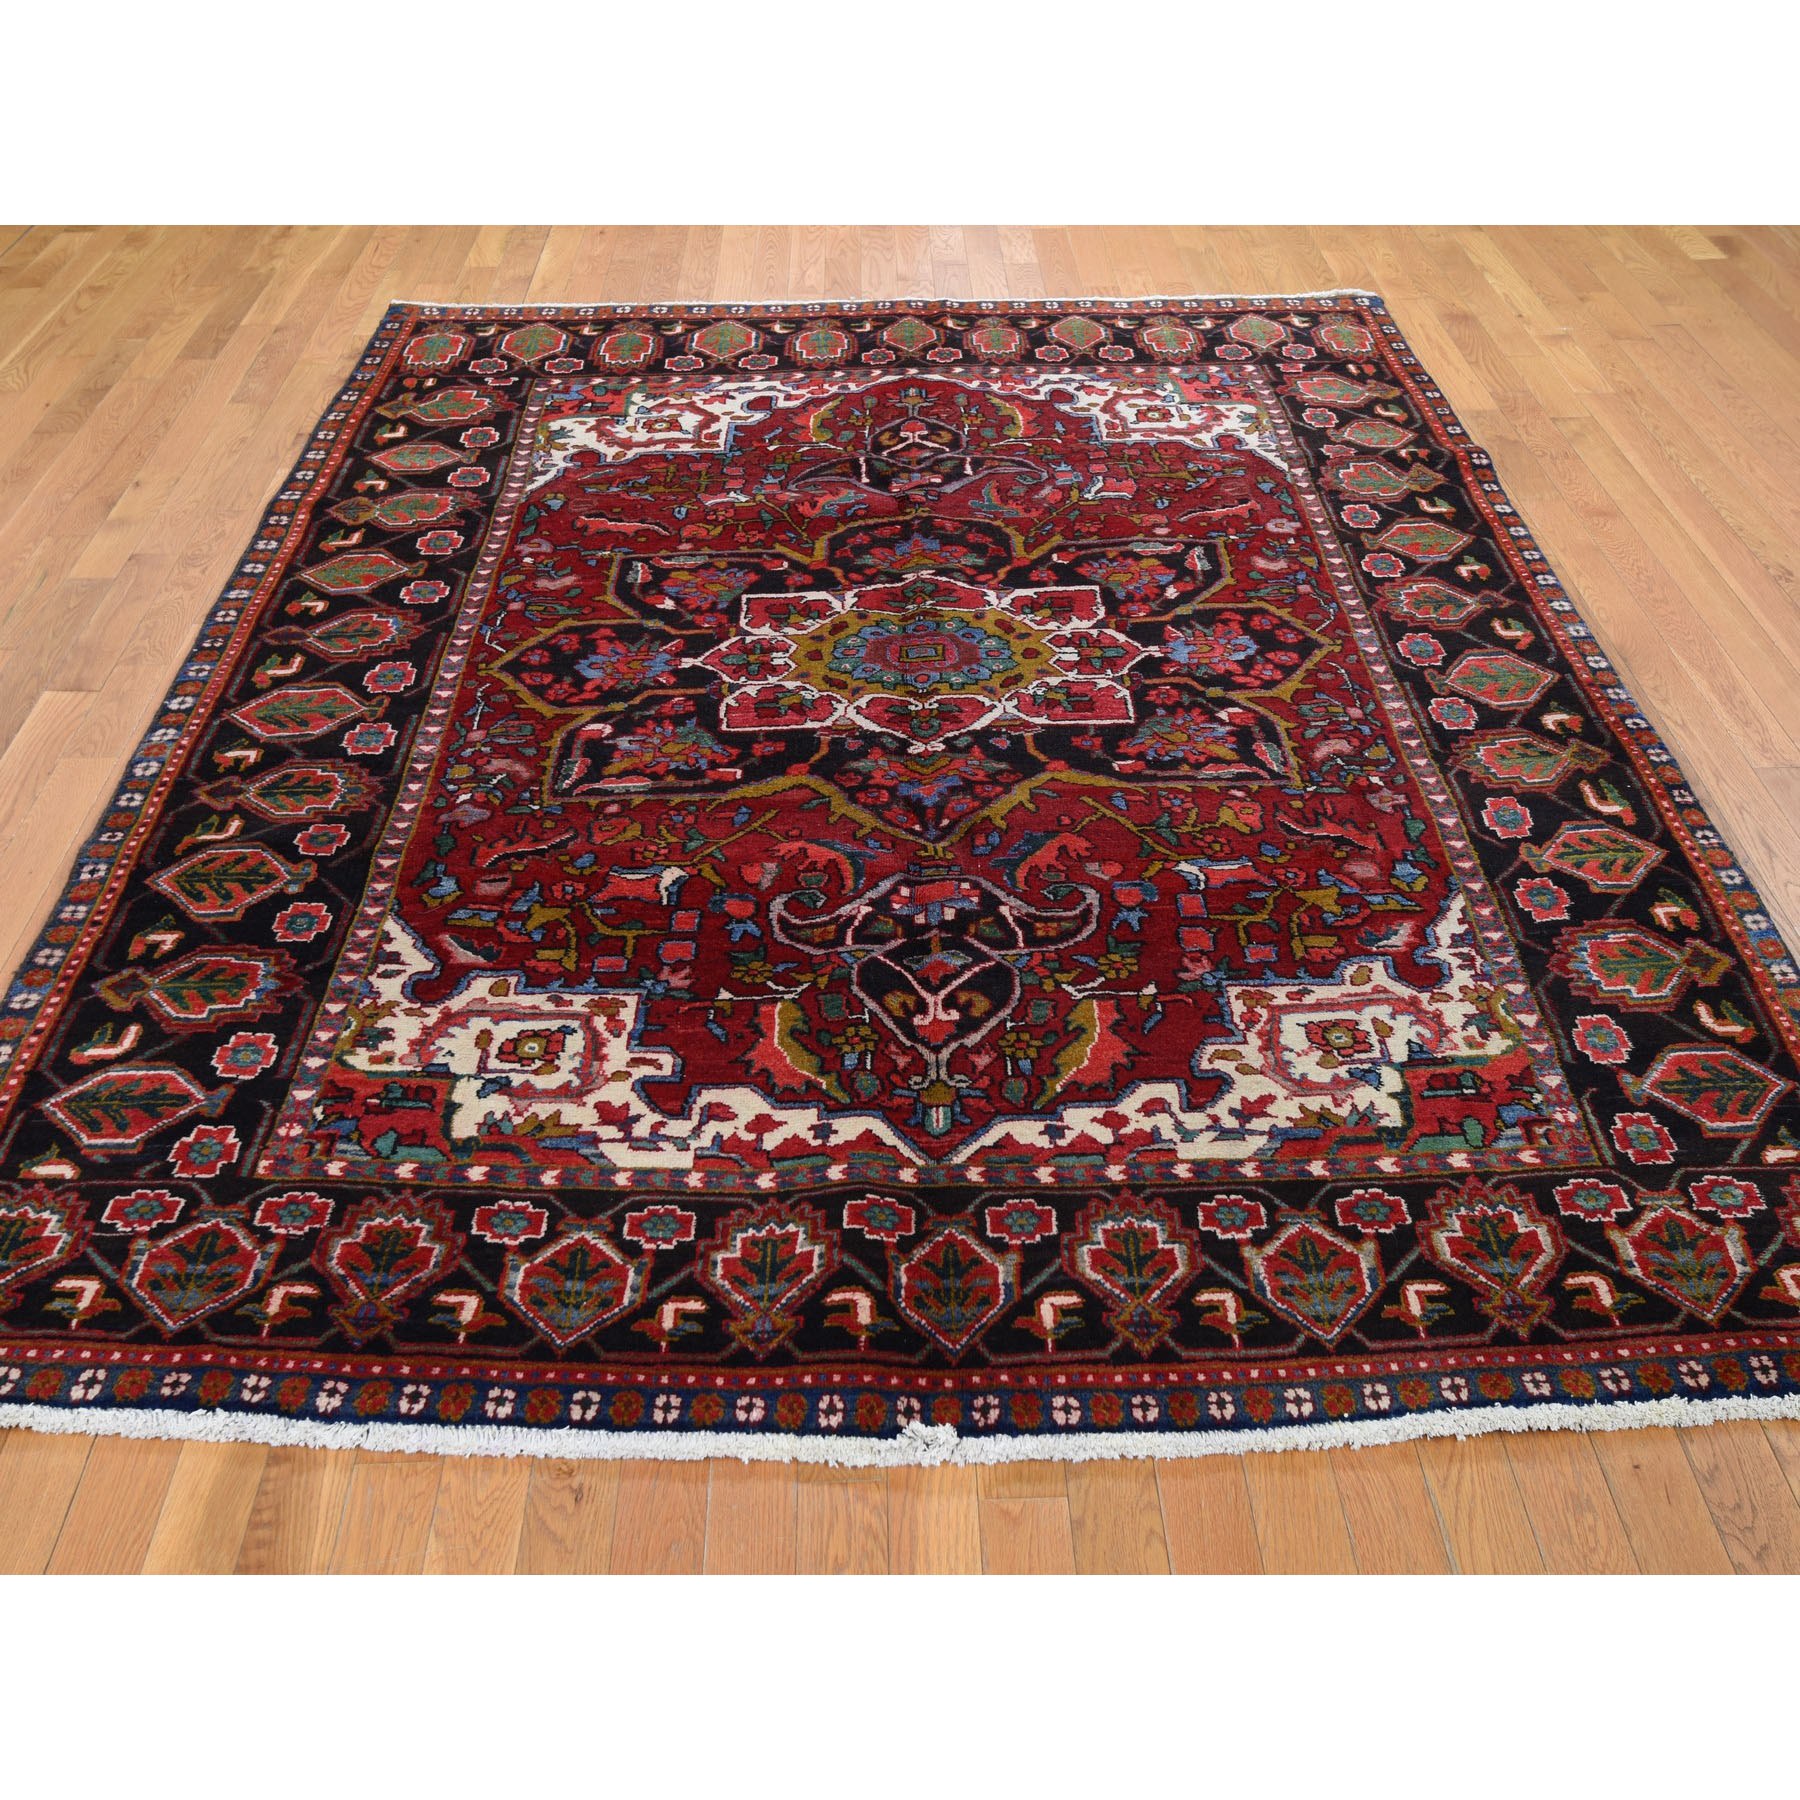 7-2 x10-3  Red Semi Antique Persian Heriz Flower Design Thick and Plush Hand Knotted Oriental Rug 